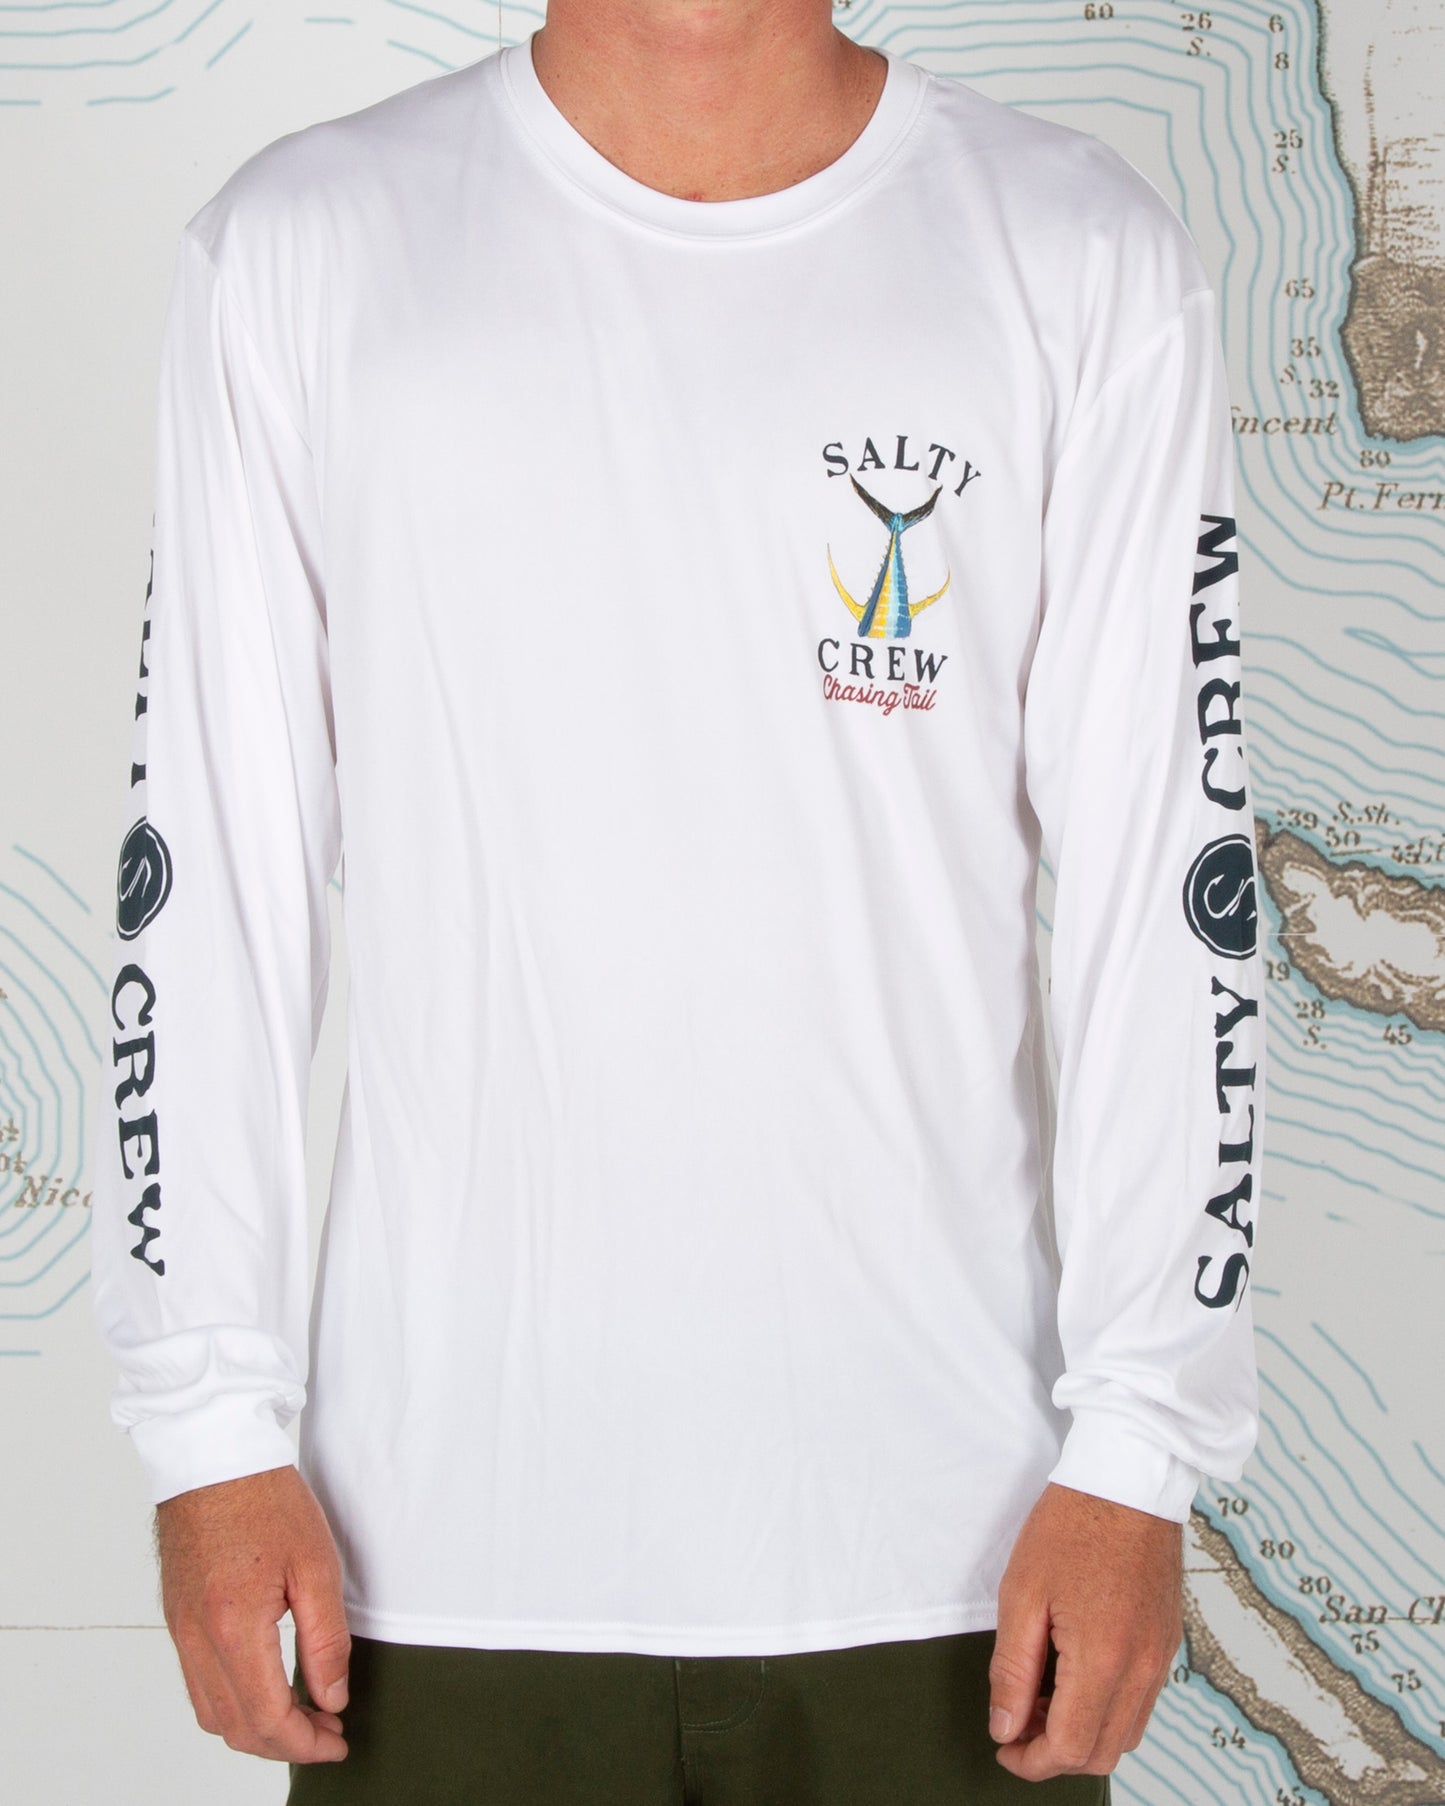 Salty Crew Men's White Tailed Long Sleeve Tech Tee - L